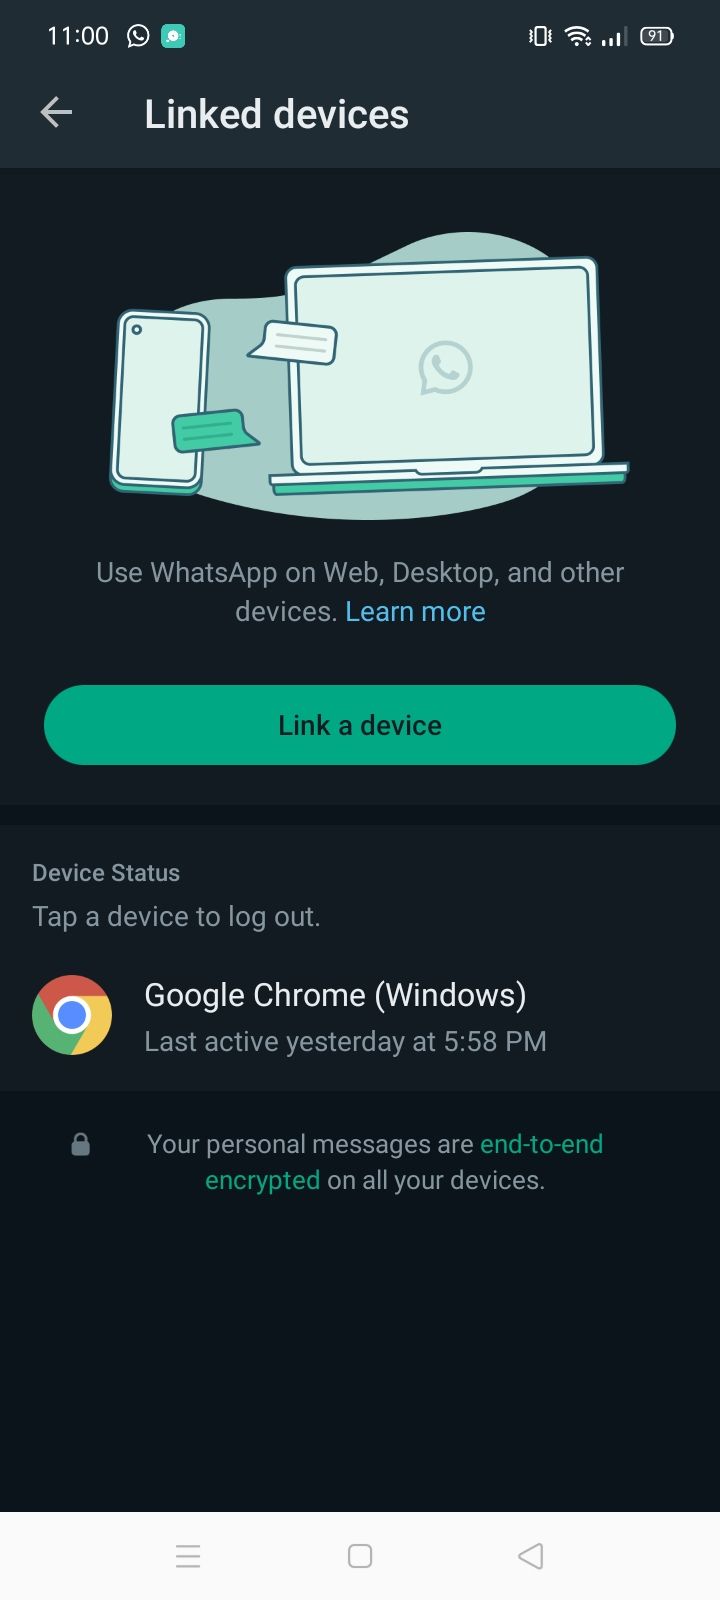 link a device option to start the device linking process on whatsapp